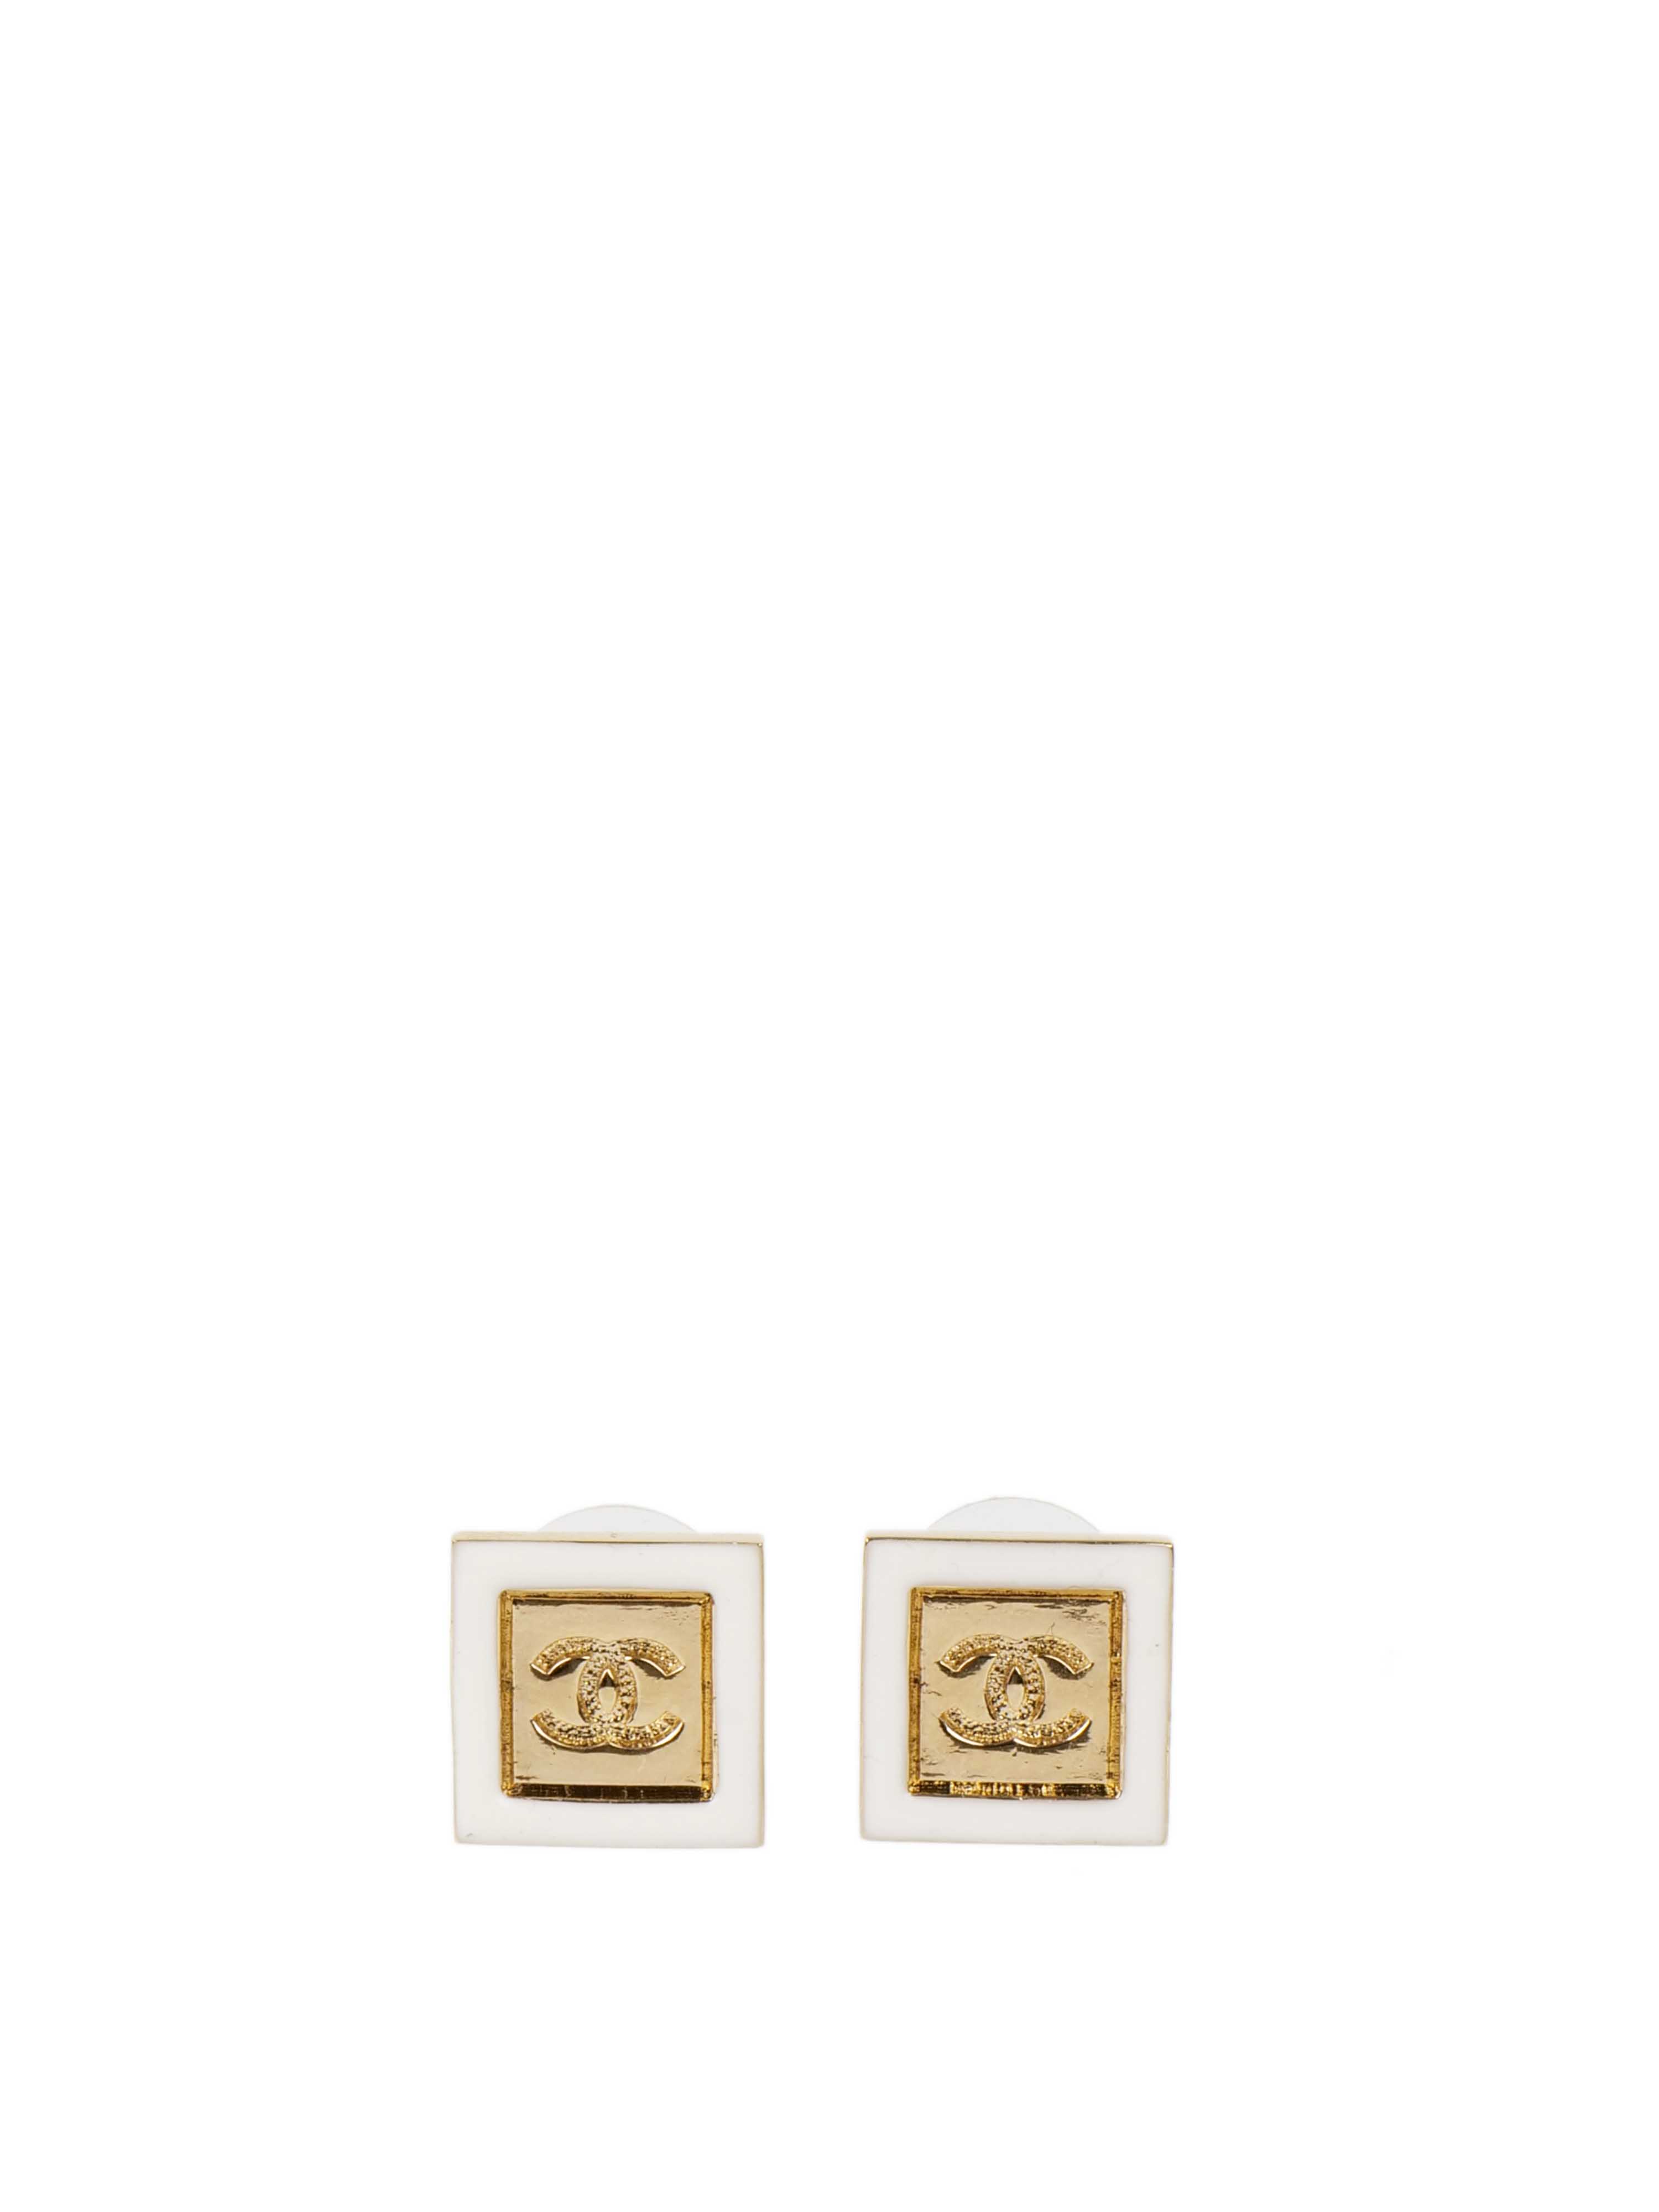 Chanel CC Square Earrings.